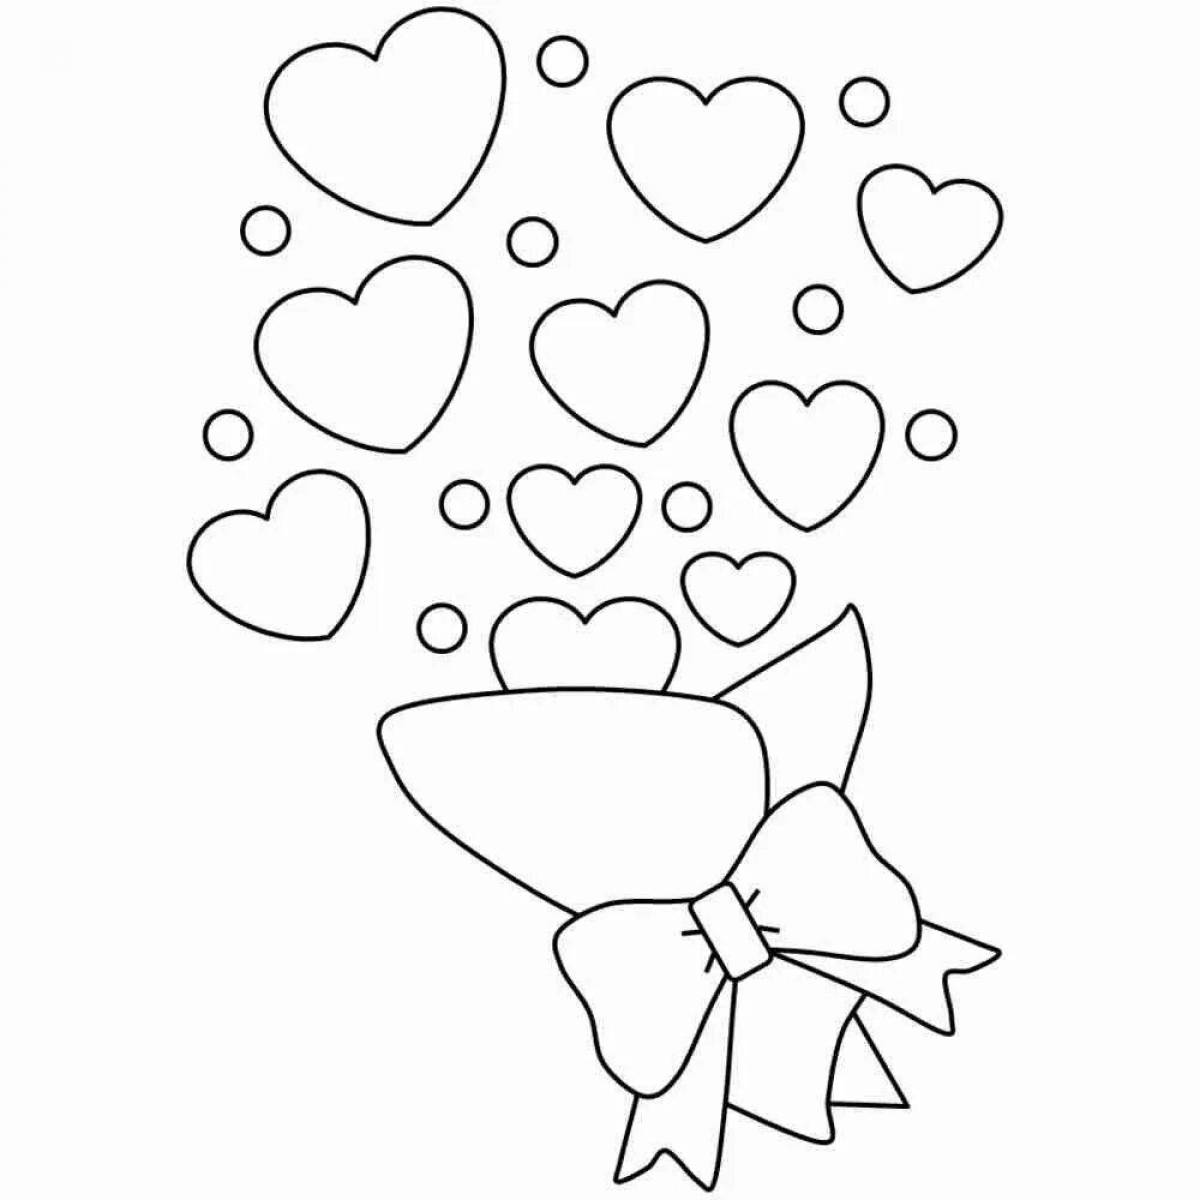 Glamorous coloring book for girls with hearts